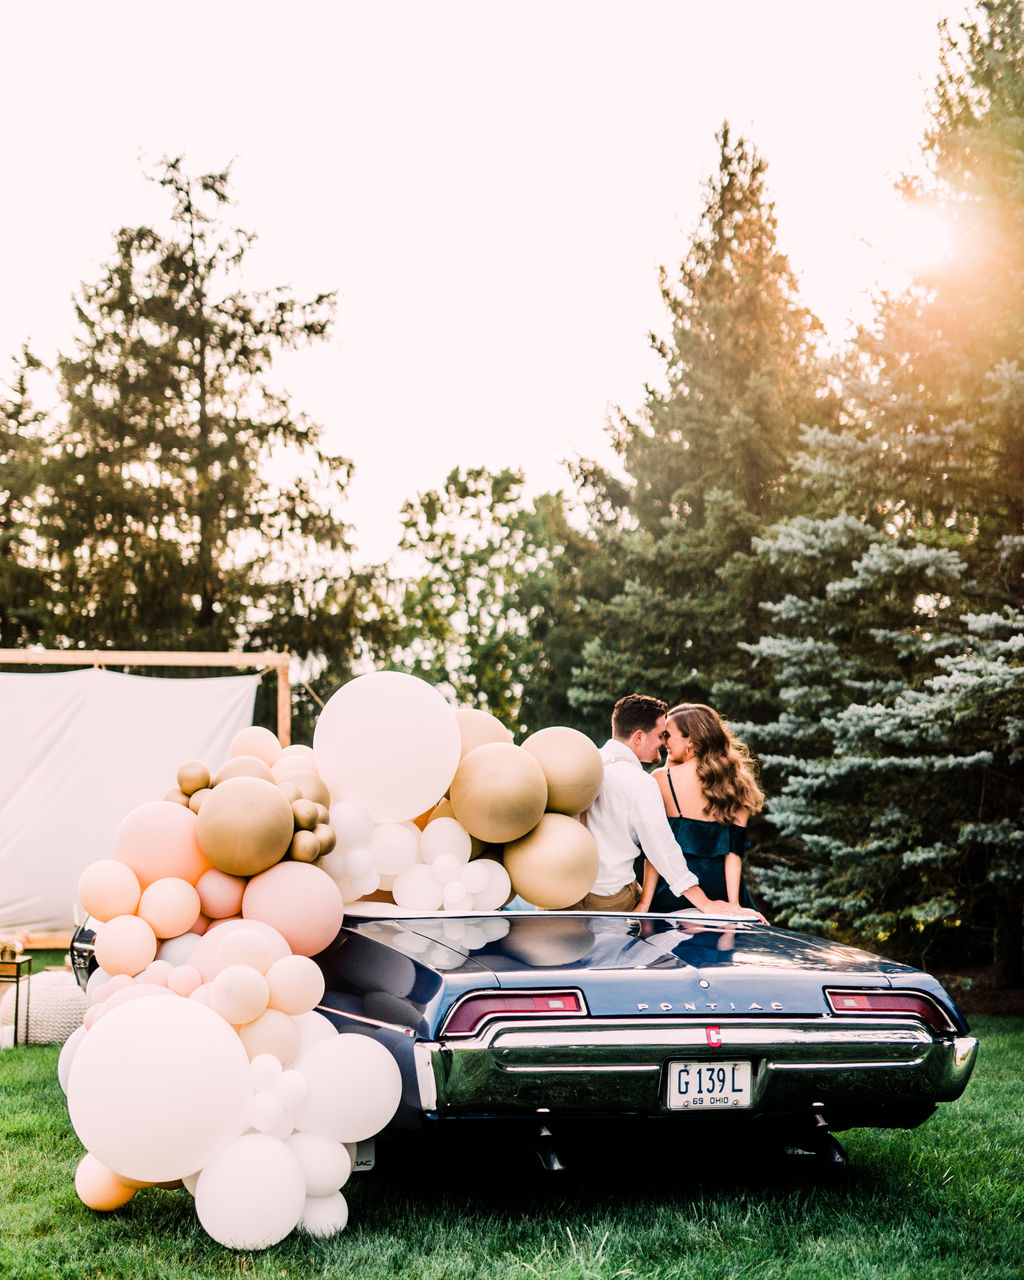 An enchanting DIY drive-in engagement shoot at golden hour